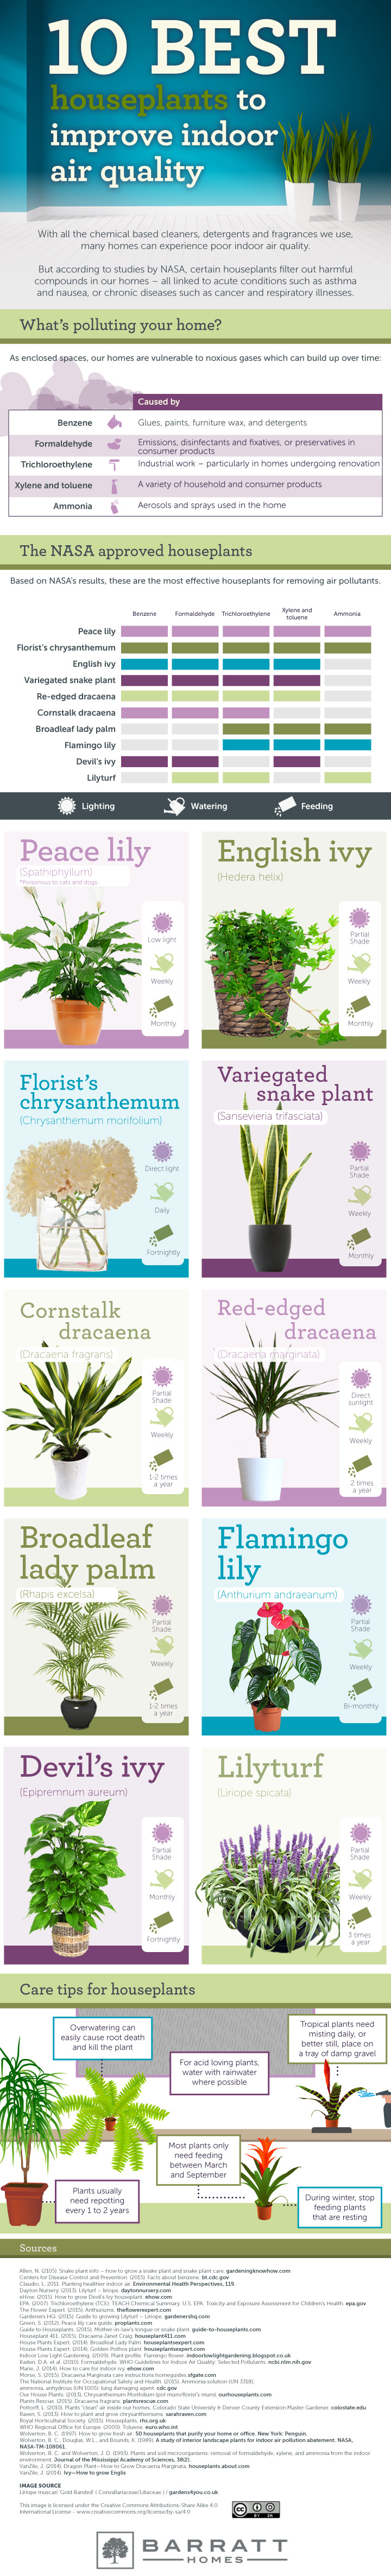 10-best-houseplants-to-improve-indoor-air-quality---V3_mini